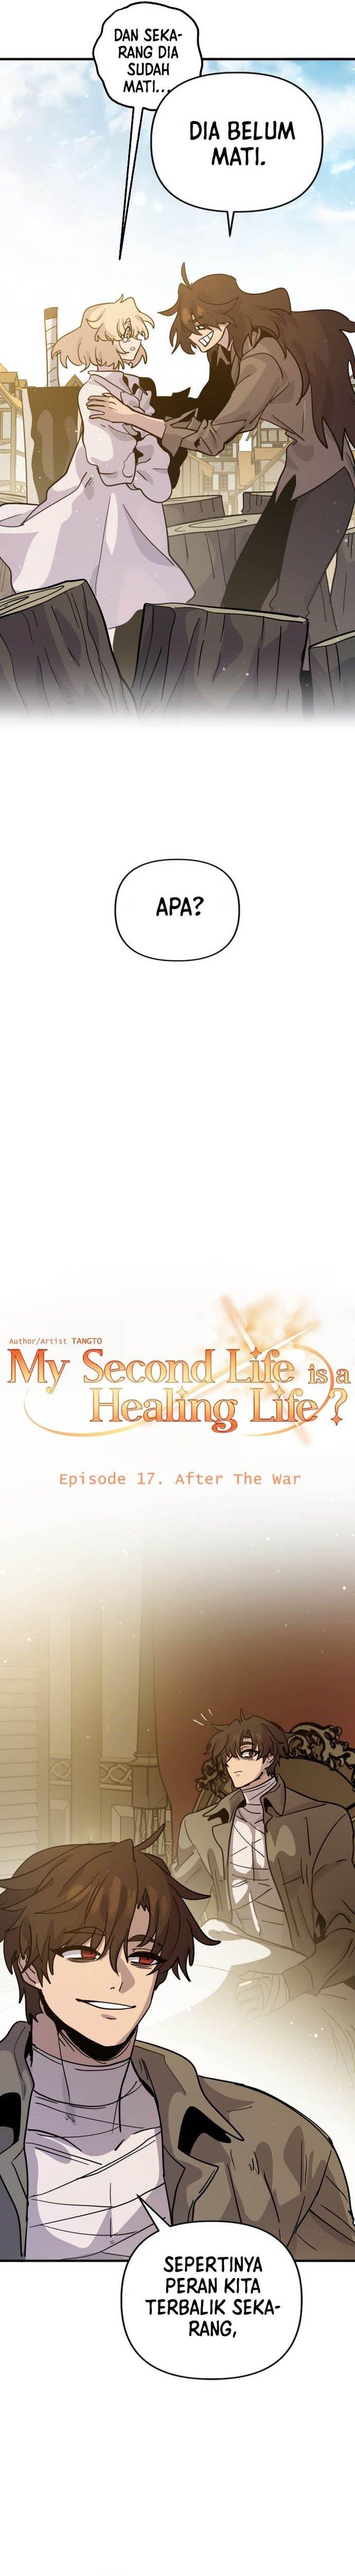 The Second Life Is a Healing Life? Chapter 17